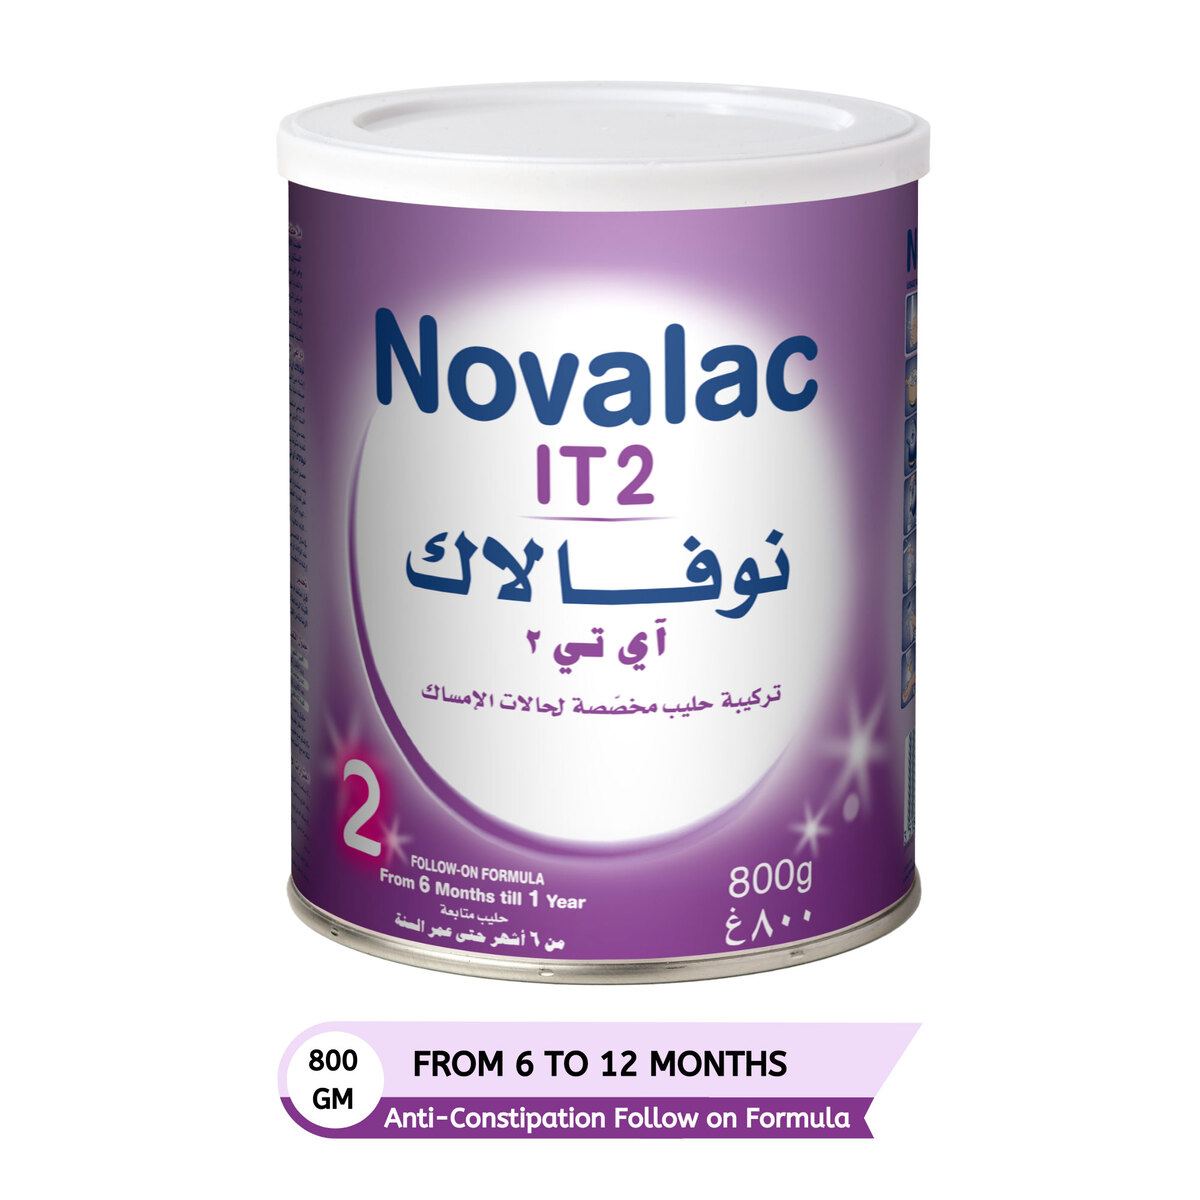 Novalac IT, 2 Anti-Constipation Follow On Formula From, 6-12 Months, 800 g